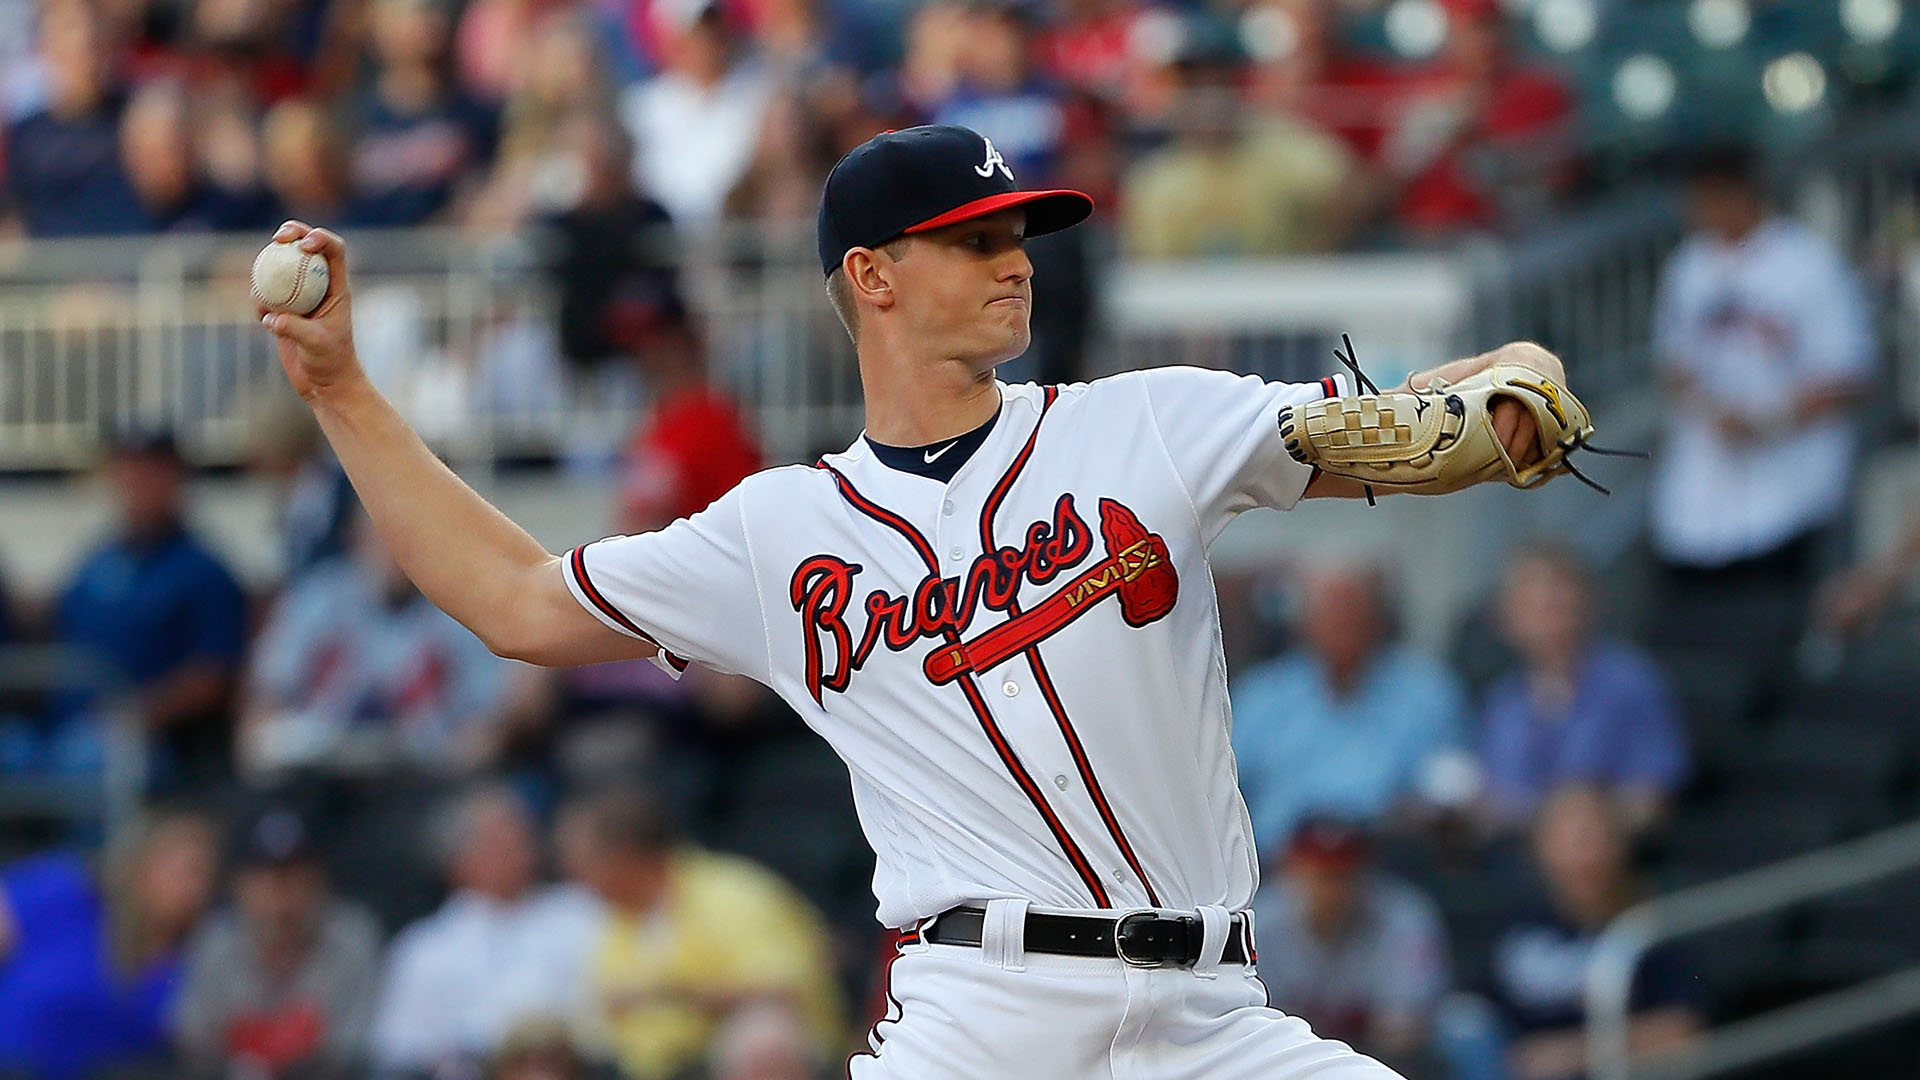 Mike Soroka and Austin Riley might have been the stories of the day in MLB.